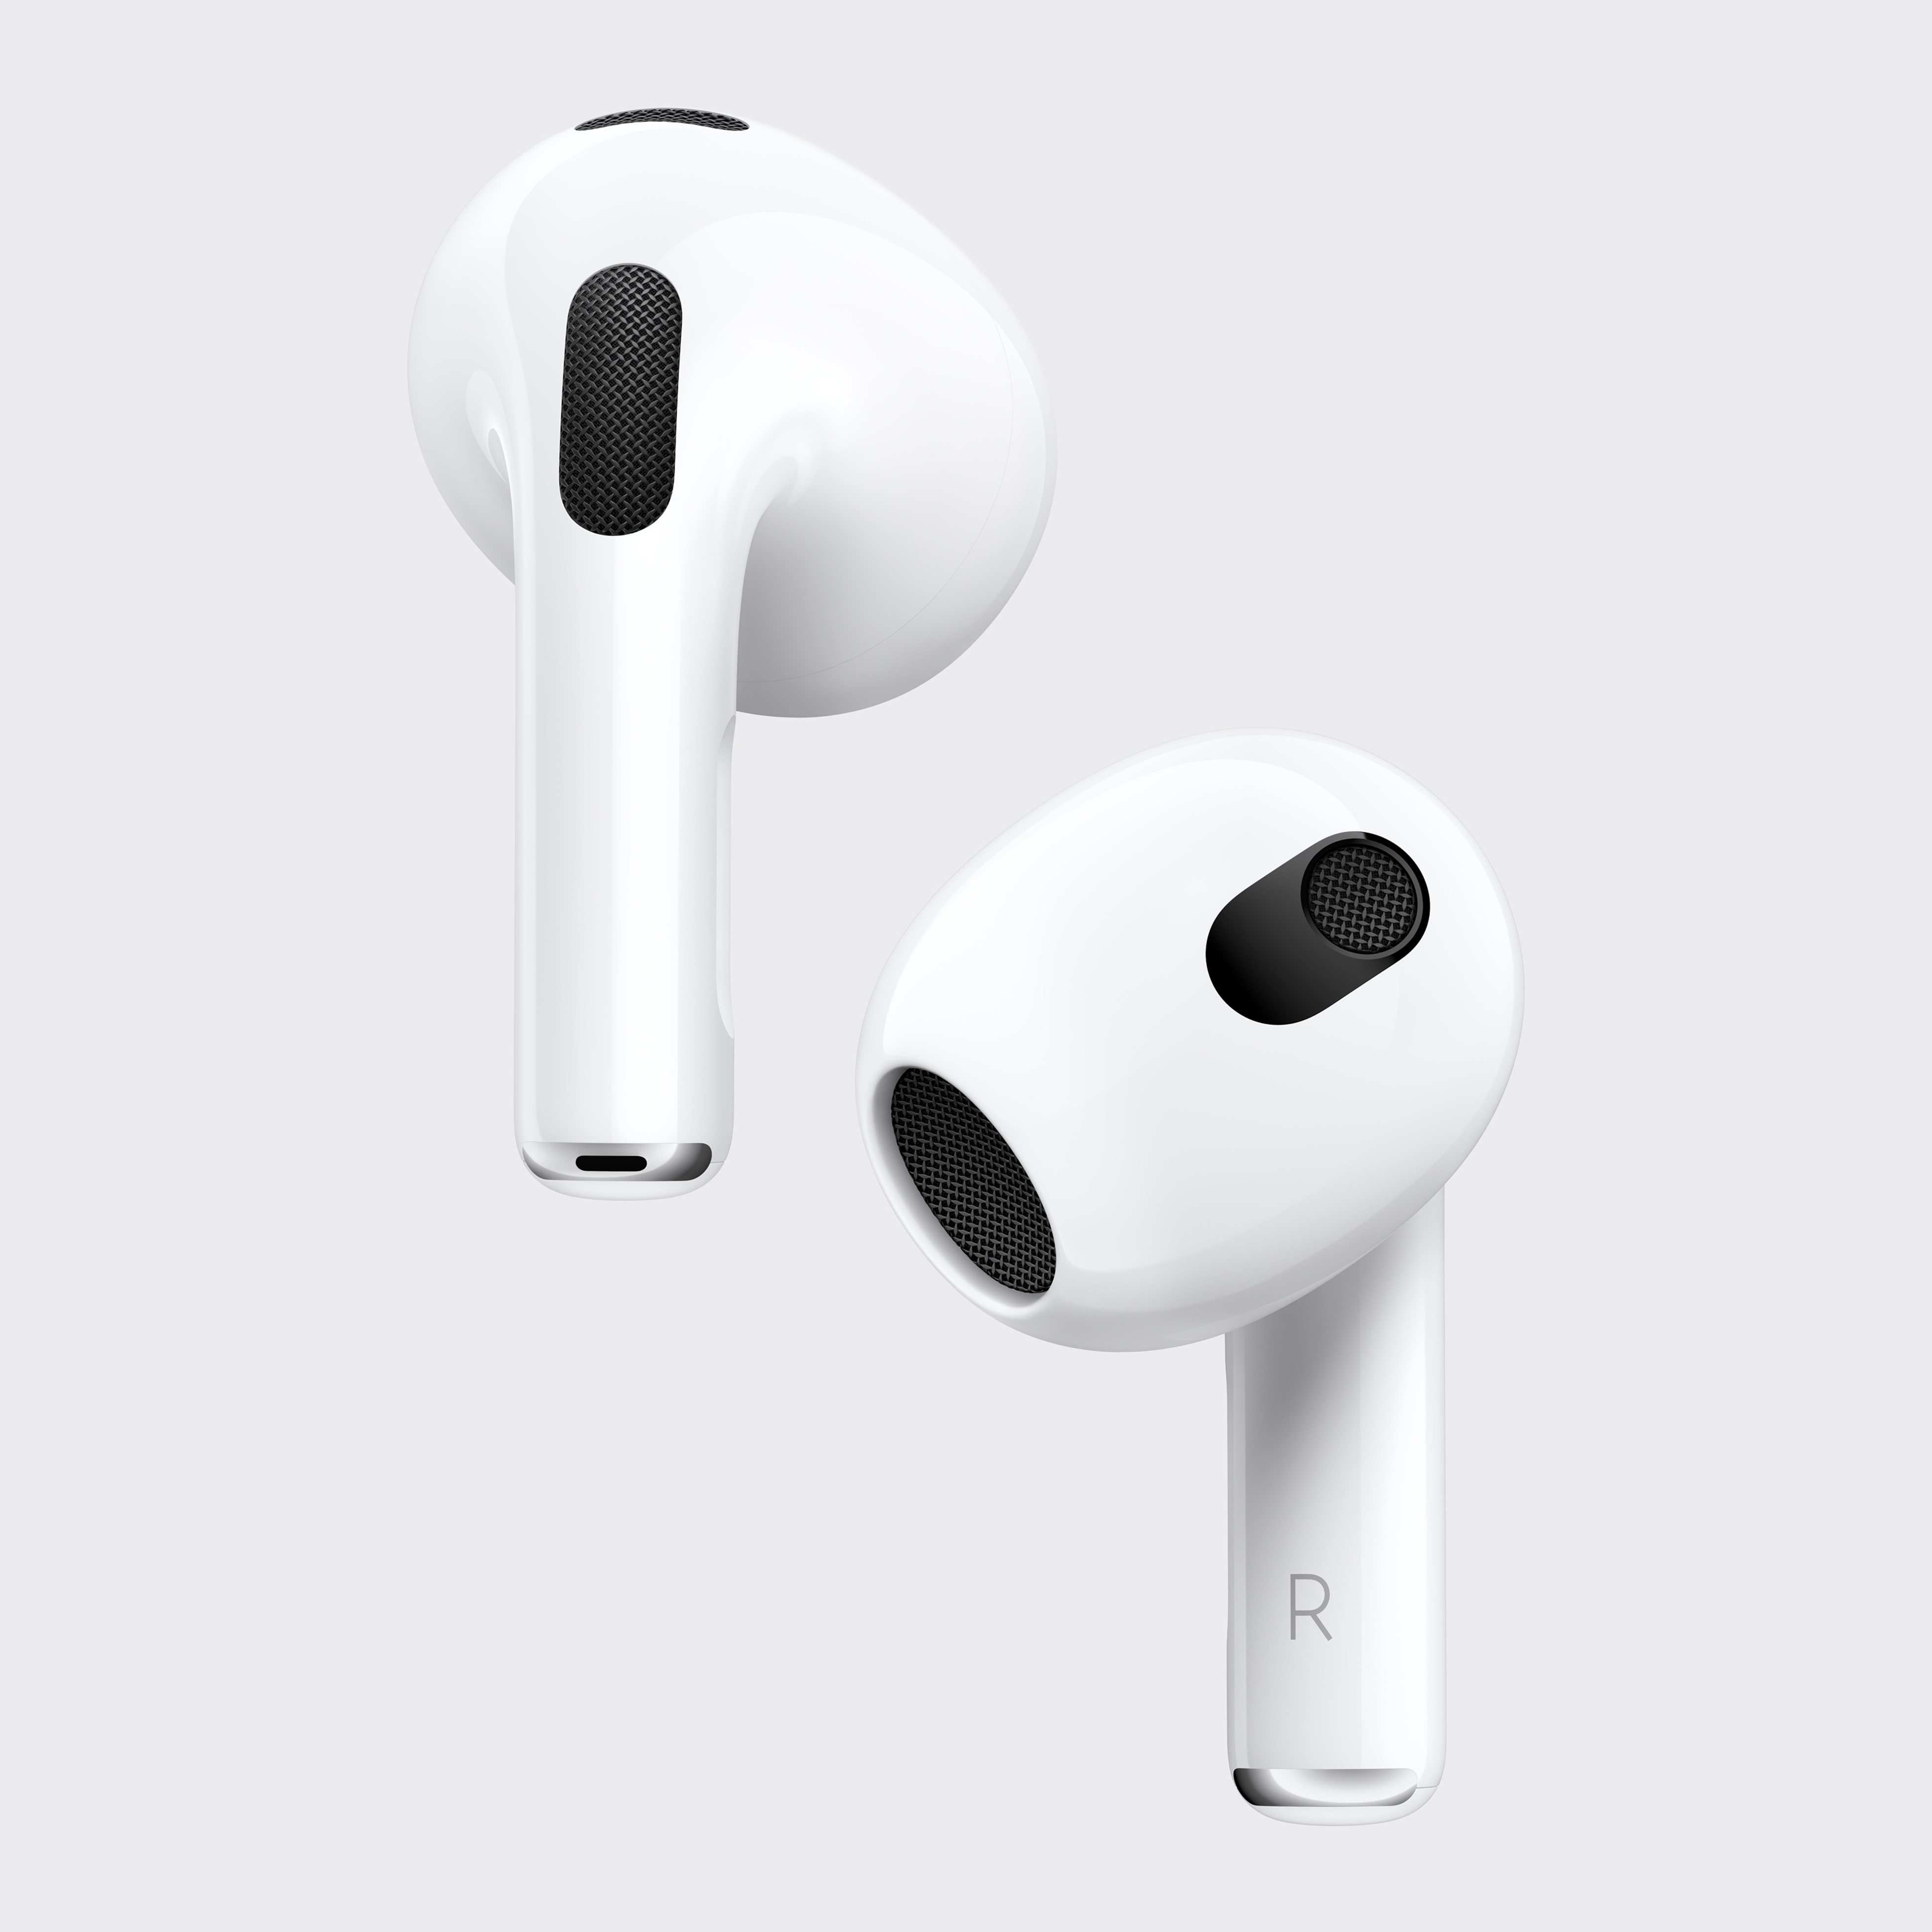 Introducing the of AirPods - Apple